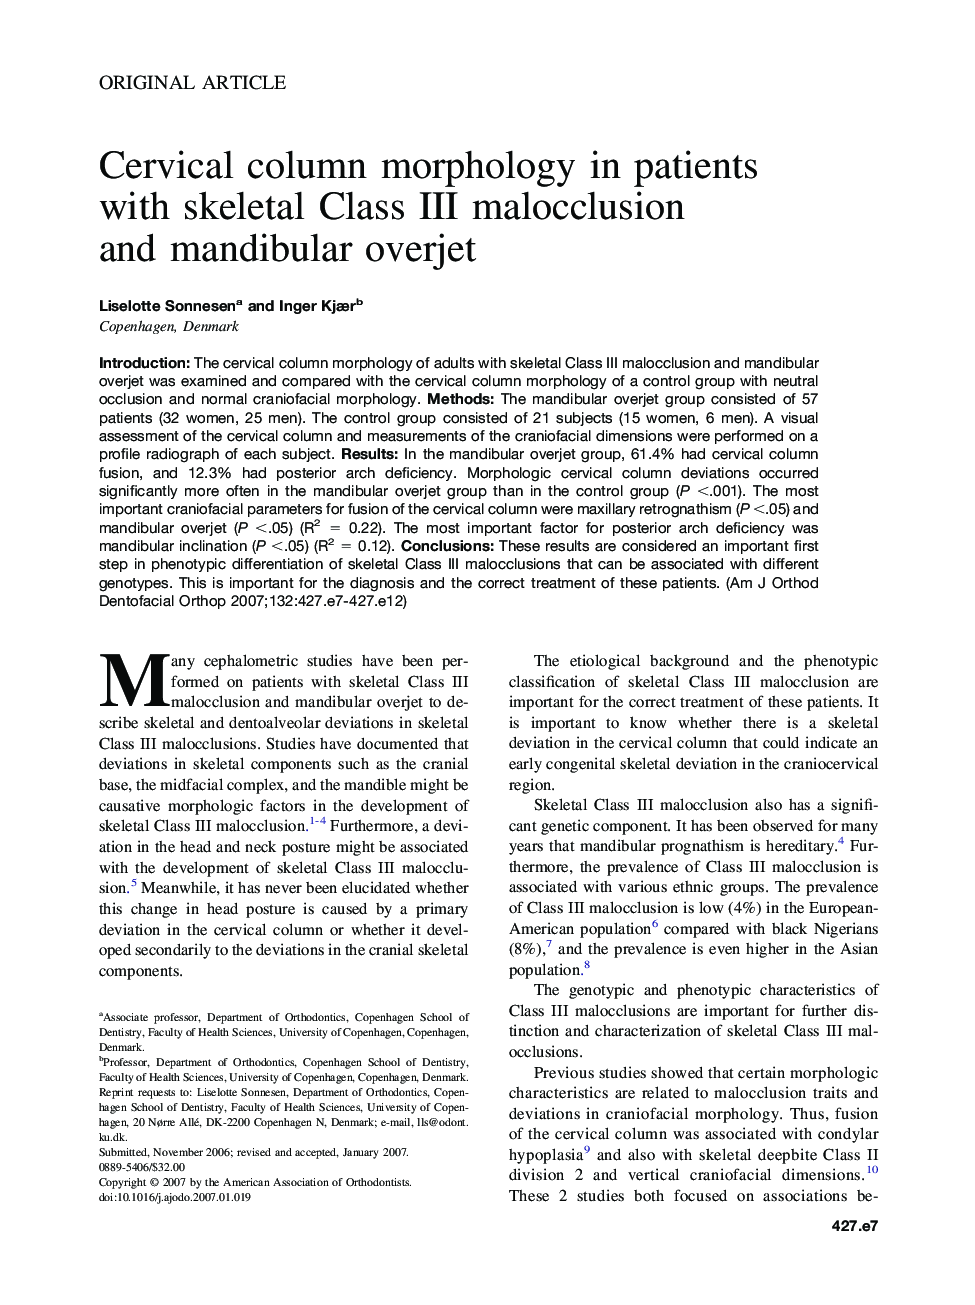 Cervical column morphology in patients with skeletal Class III malocclusion and mandibular overjet